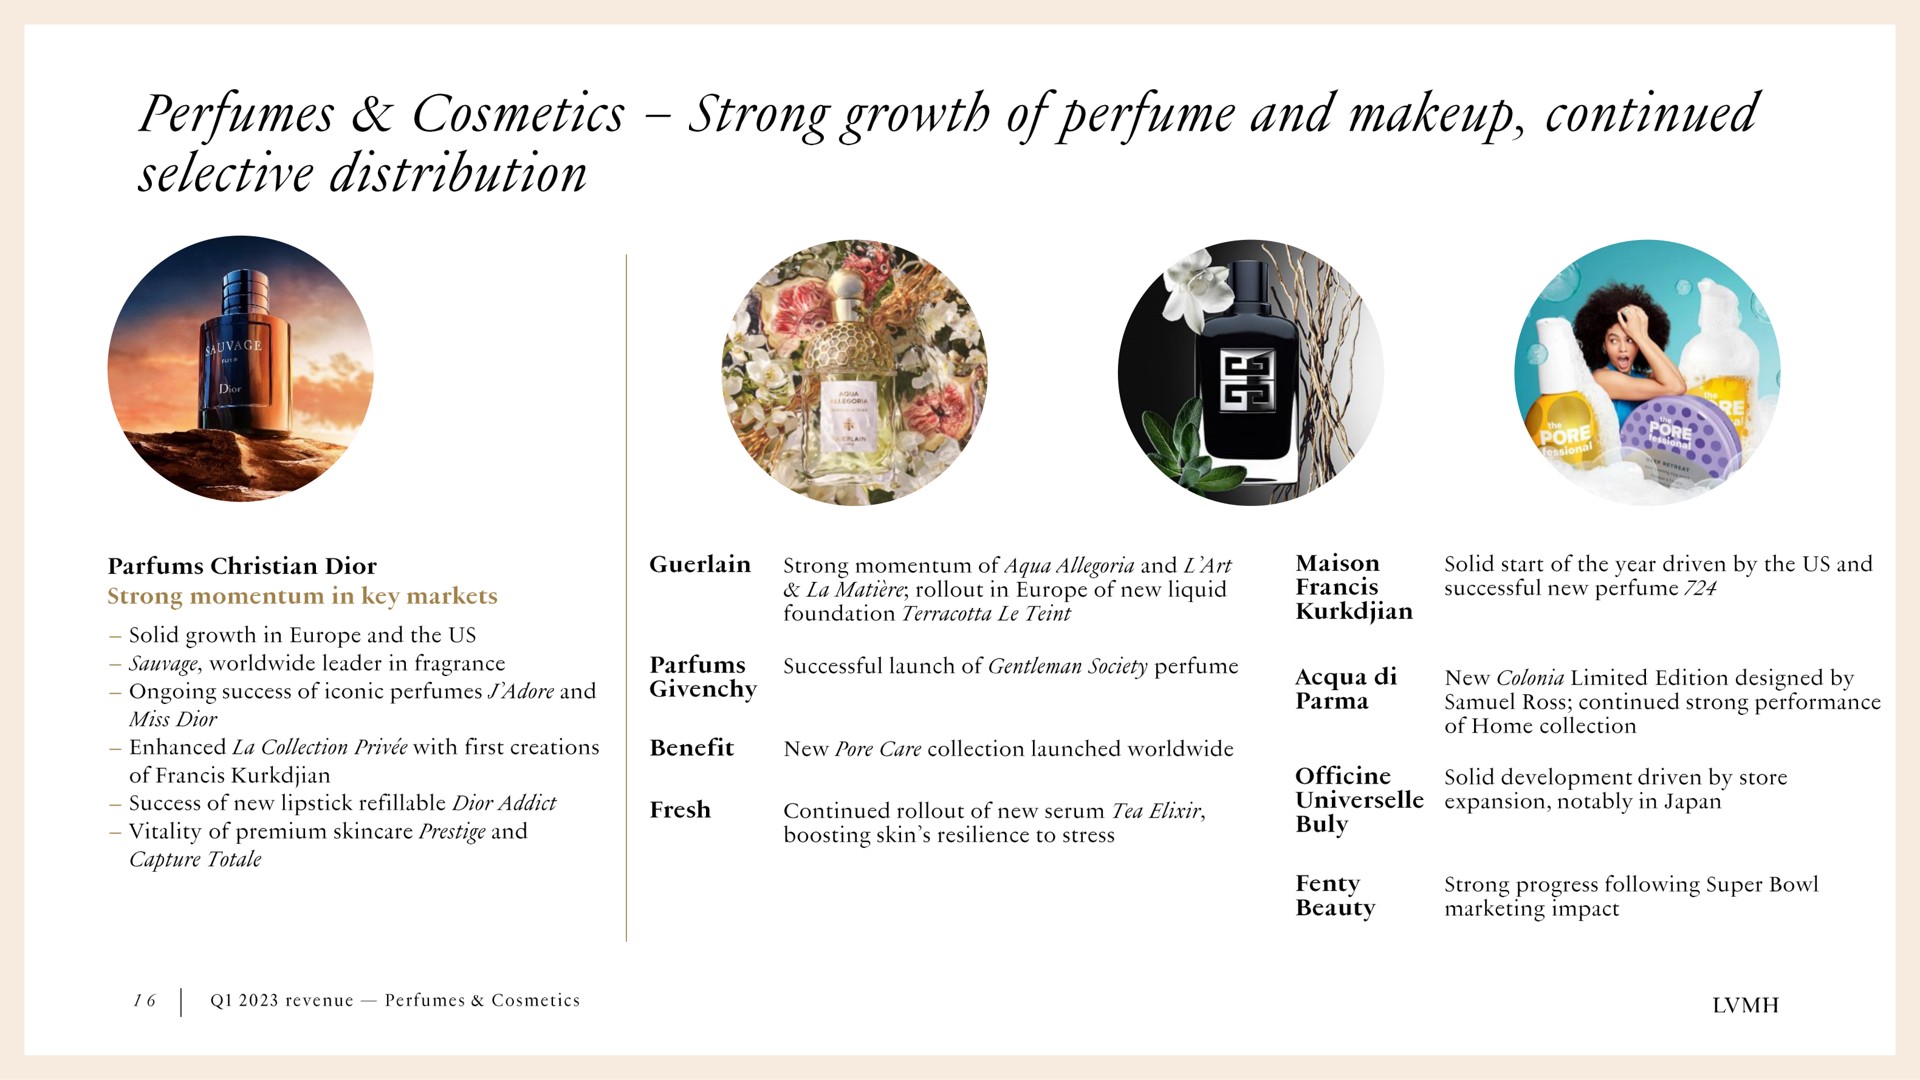 perfumes cosmetics strong growth of perfume and continued selective distribution | LVMH